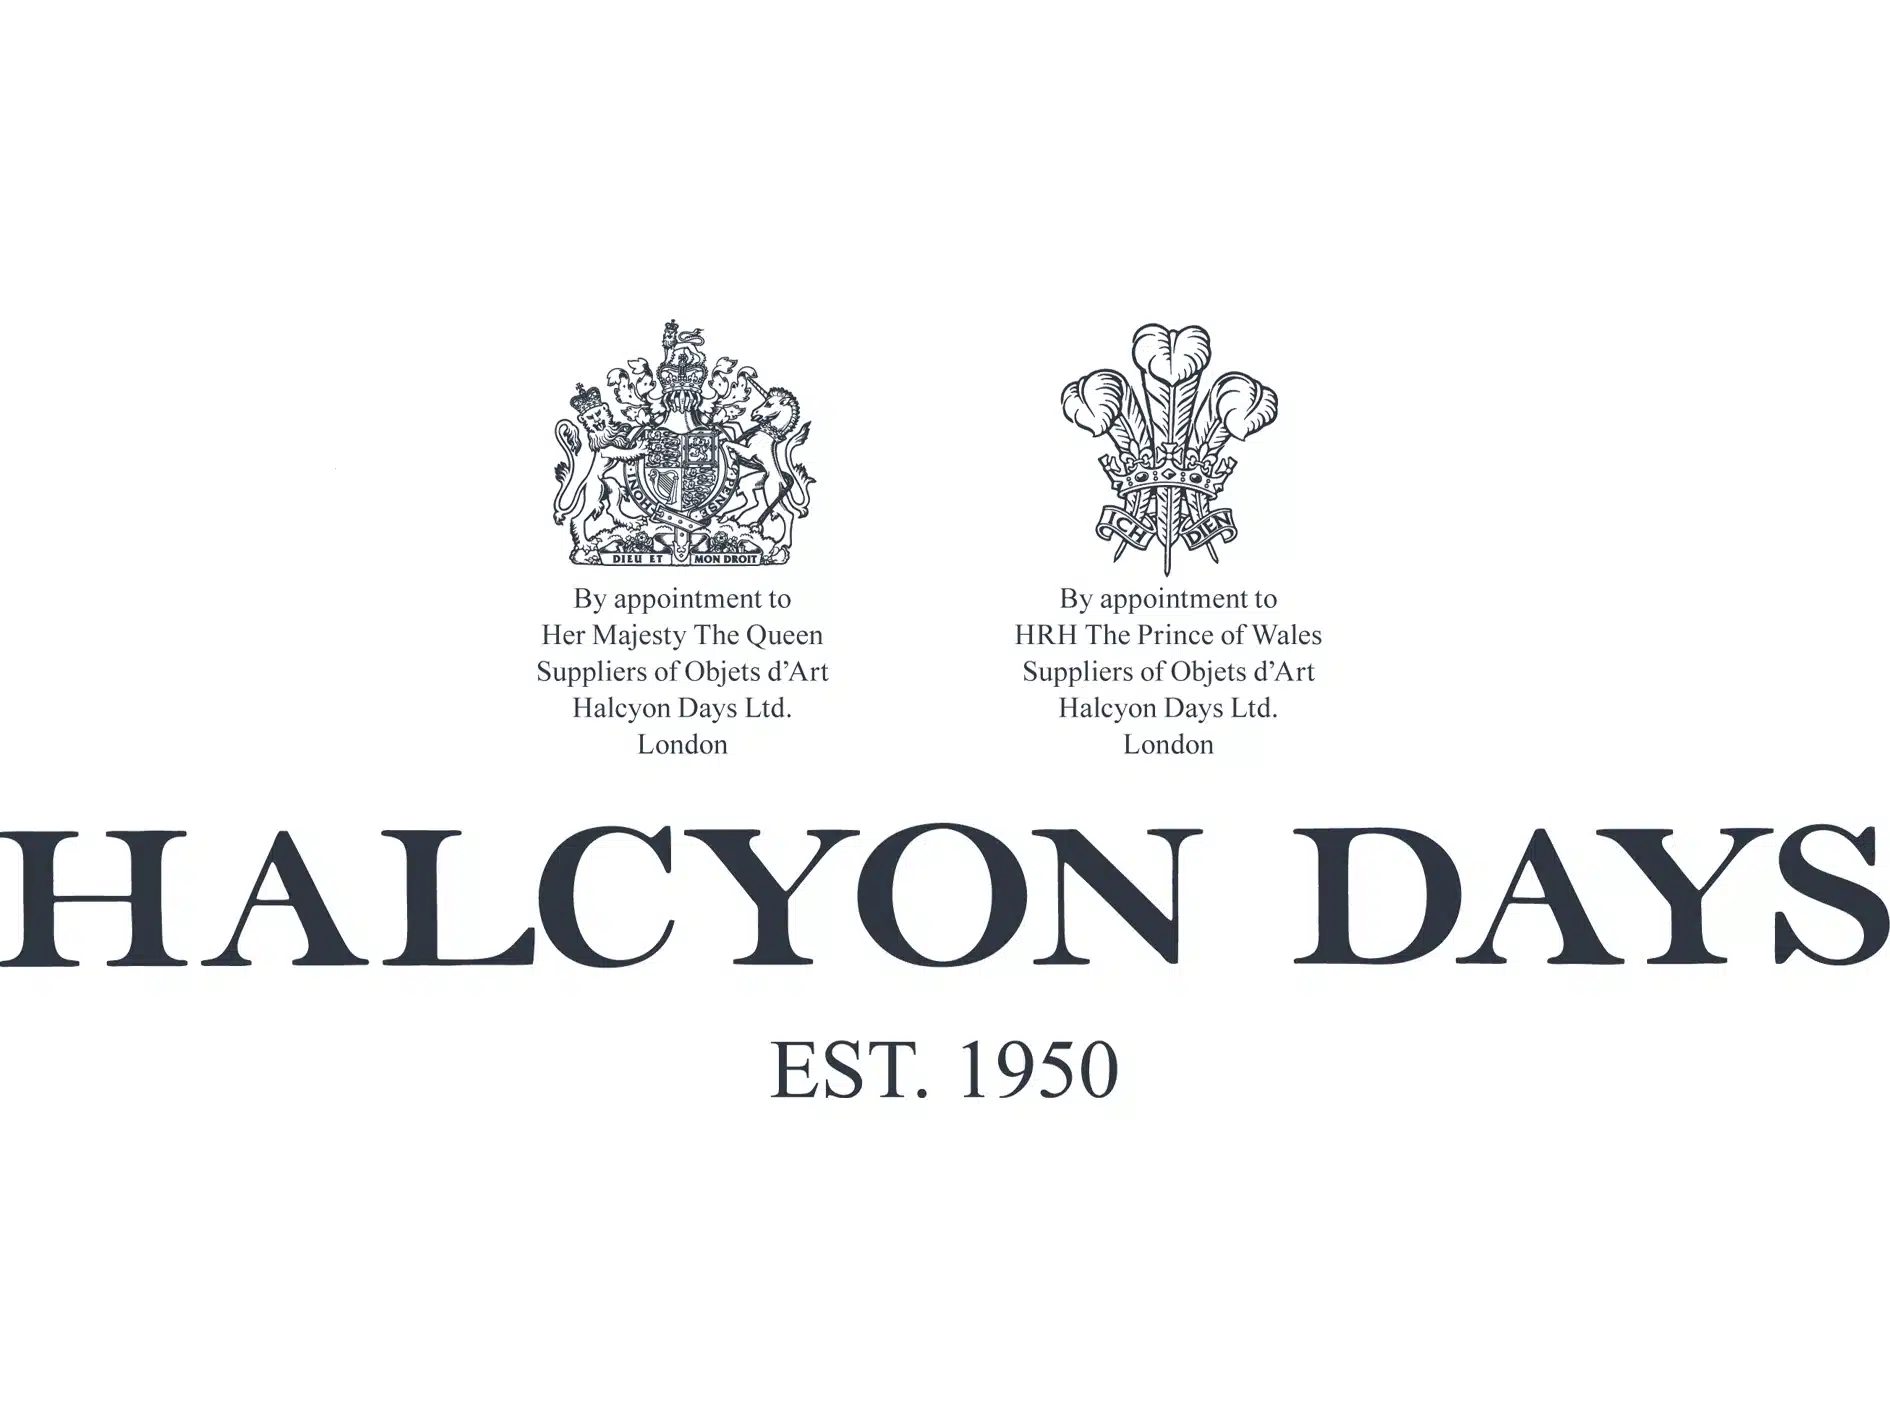 Halcyon Days is a royal warrant holder and the UK's leading enameler